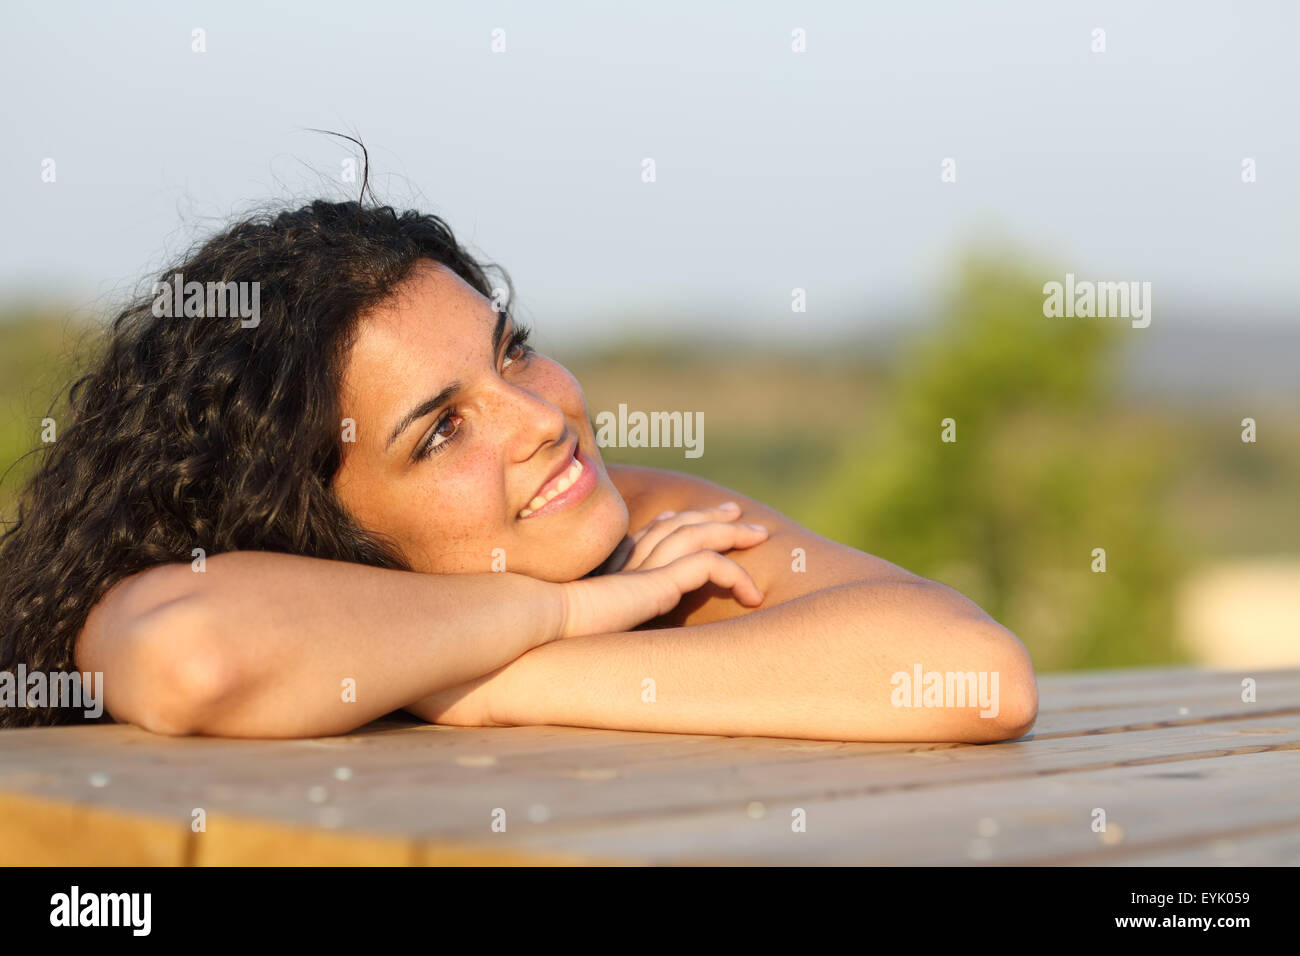 Candid girl thinking and looking sideways relaxing in a park at sunset with the sky in the background Stock Photo